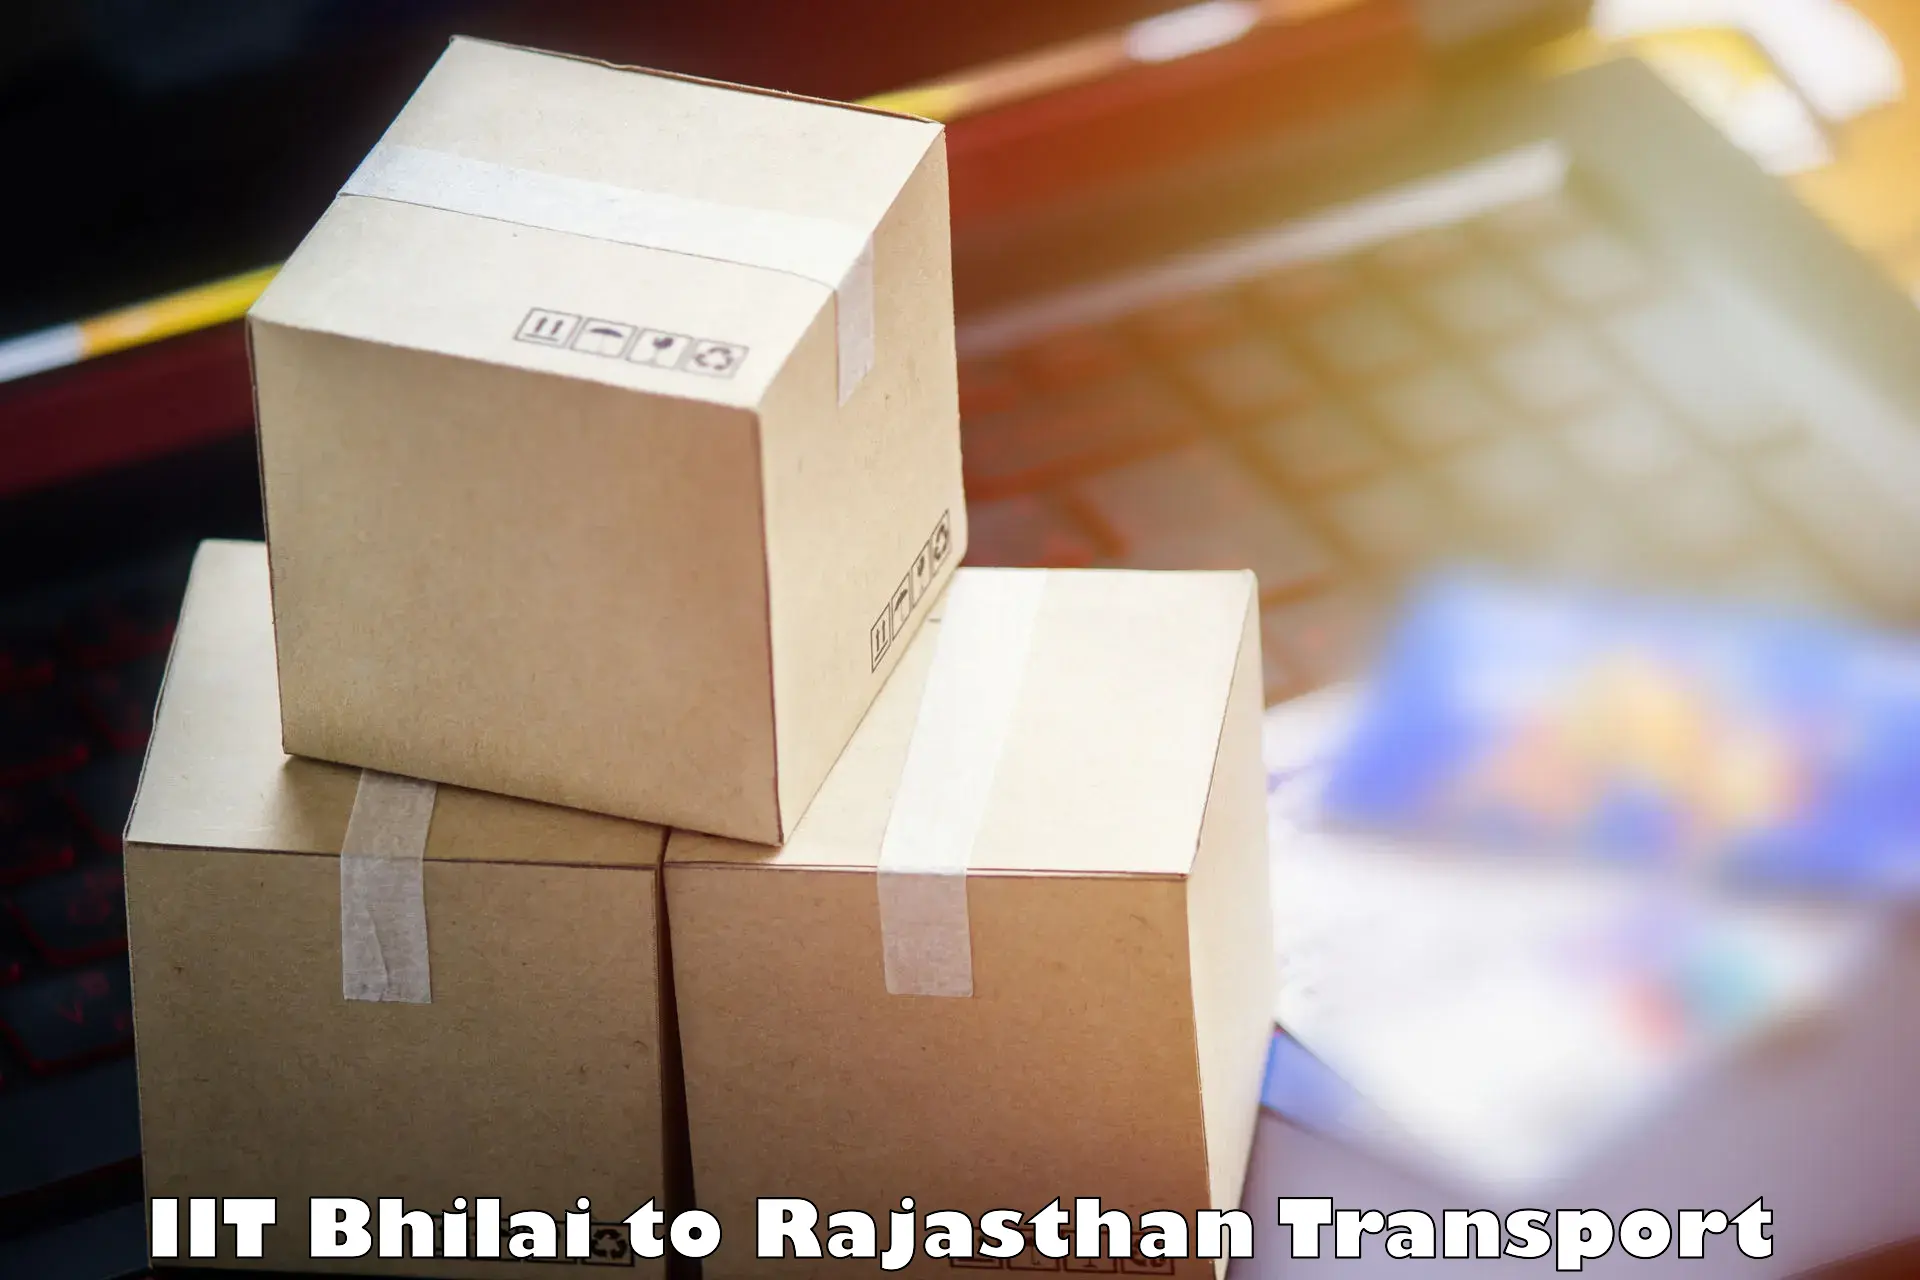 Commercial transport service IIT Bhilai to Dholpur